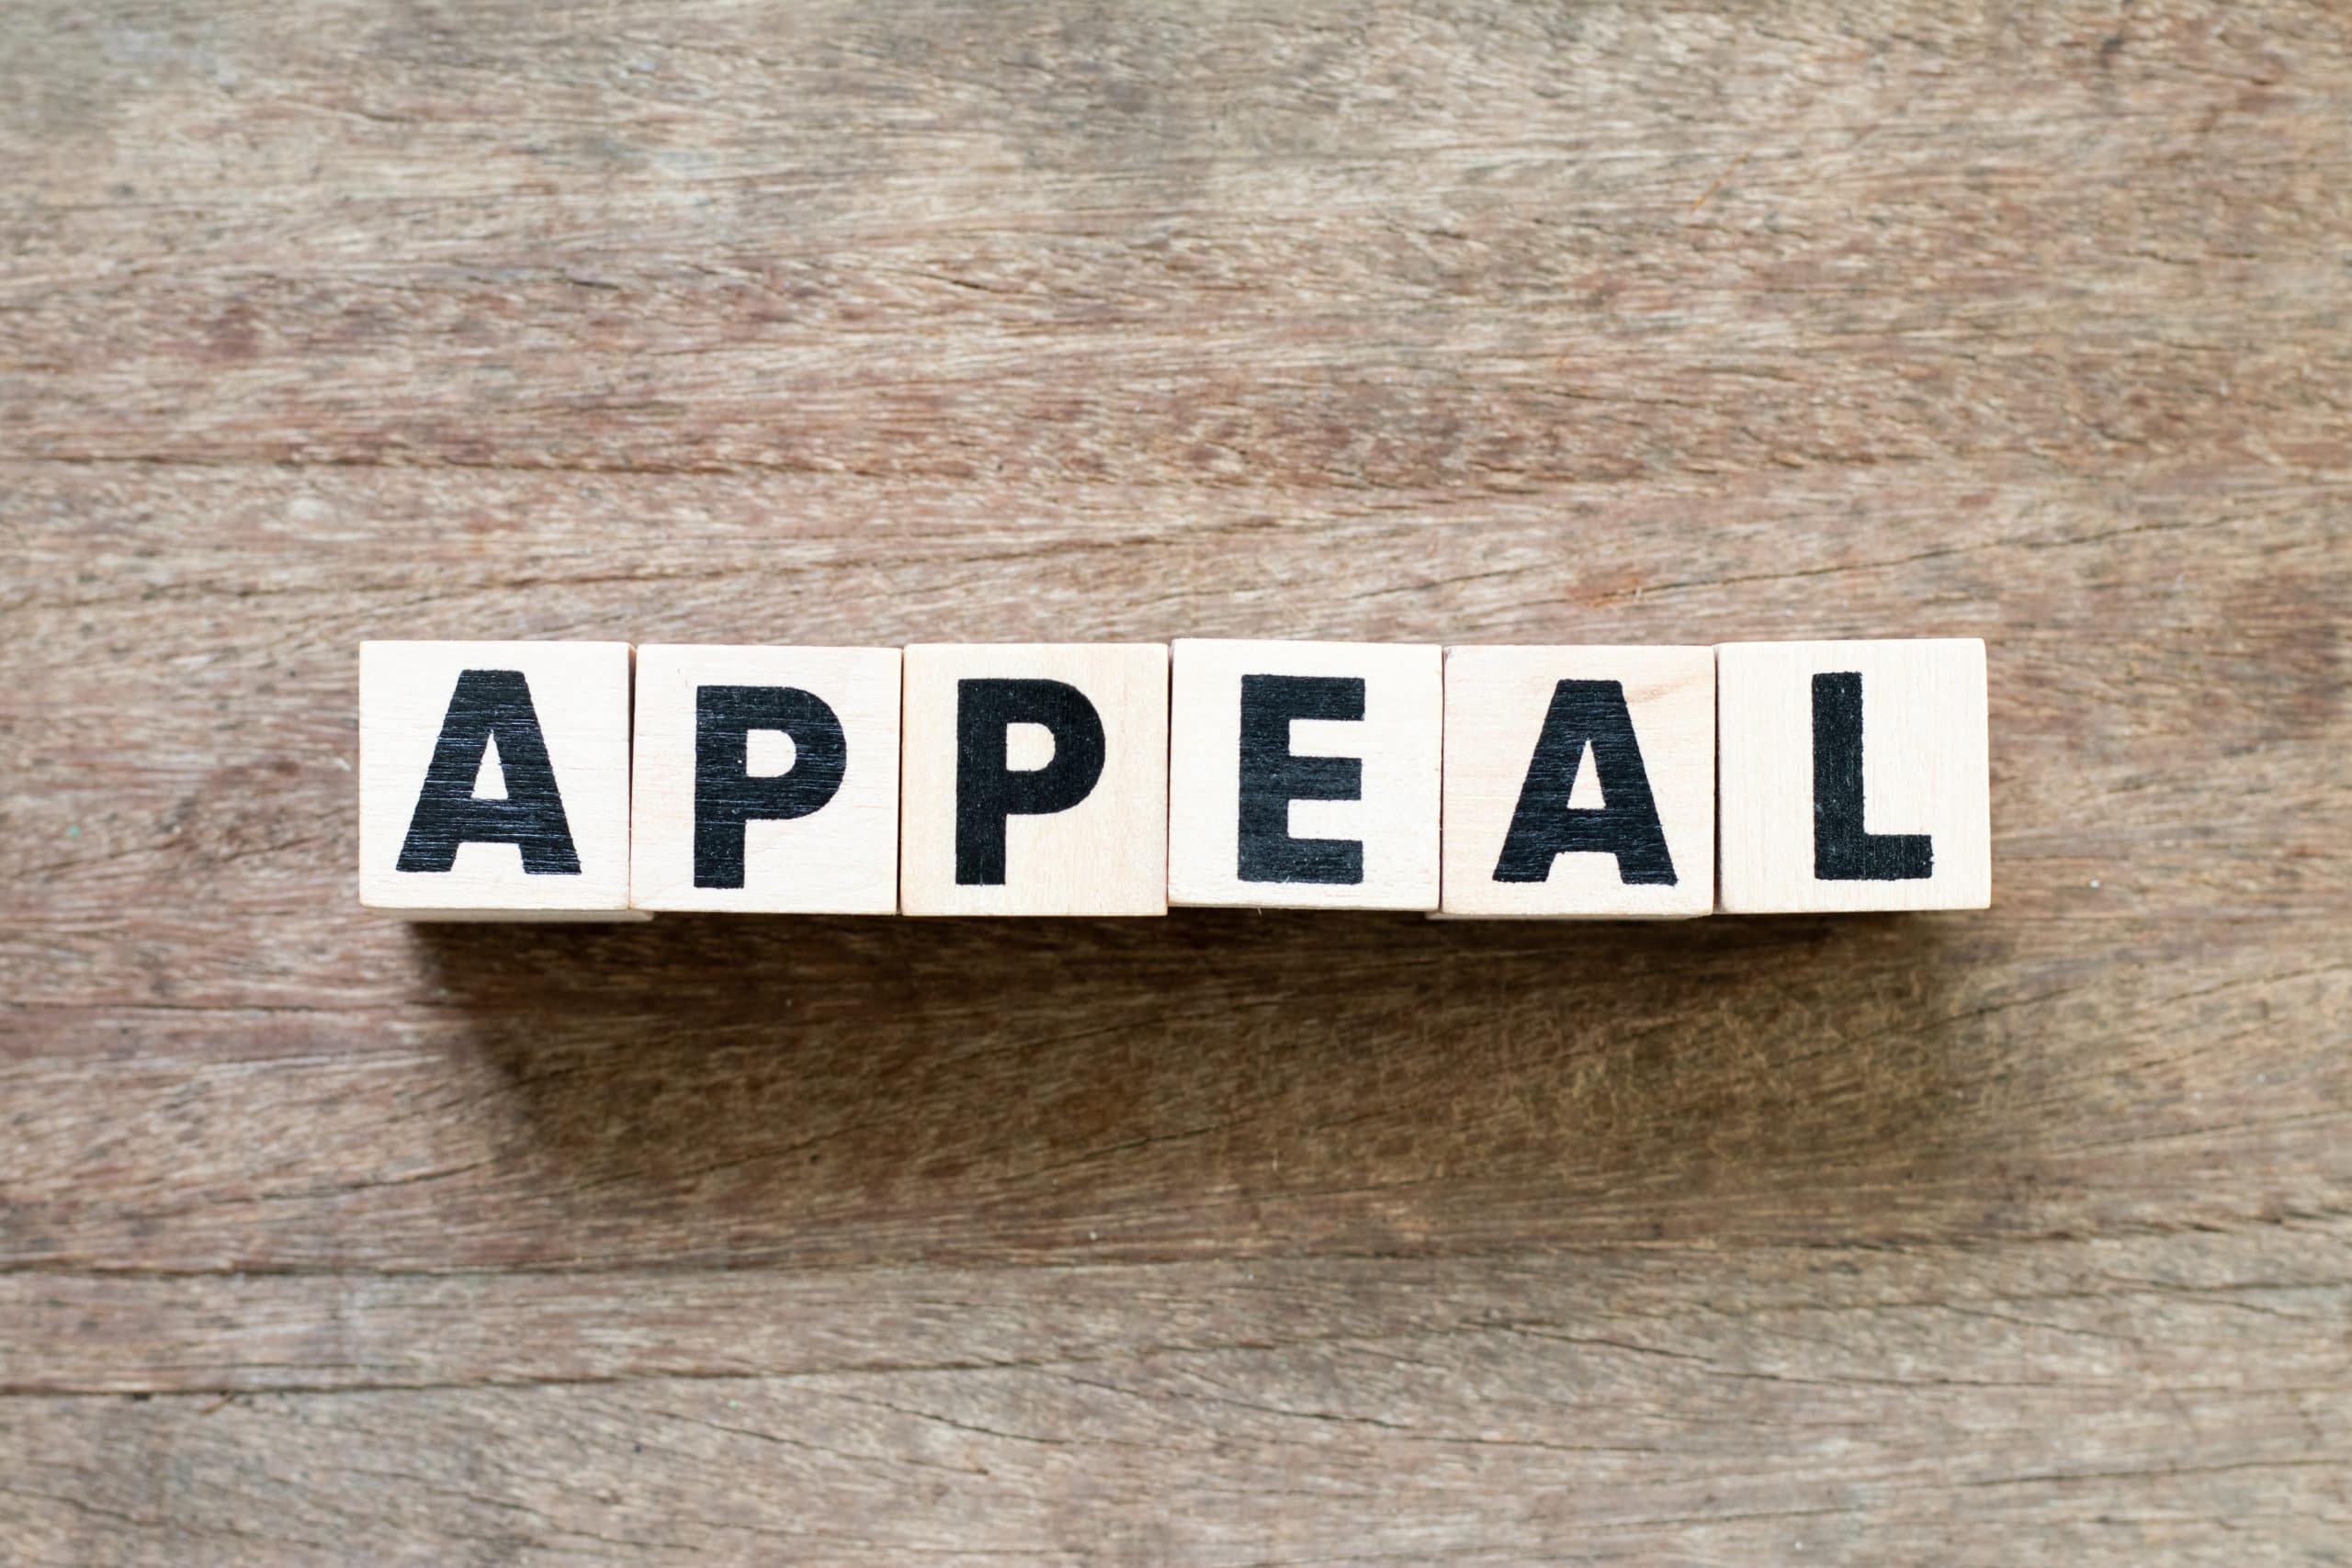 What Do I Need to Know About Filing a Criminal Appeal